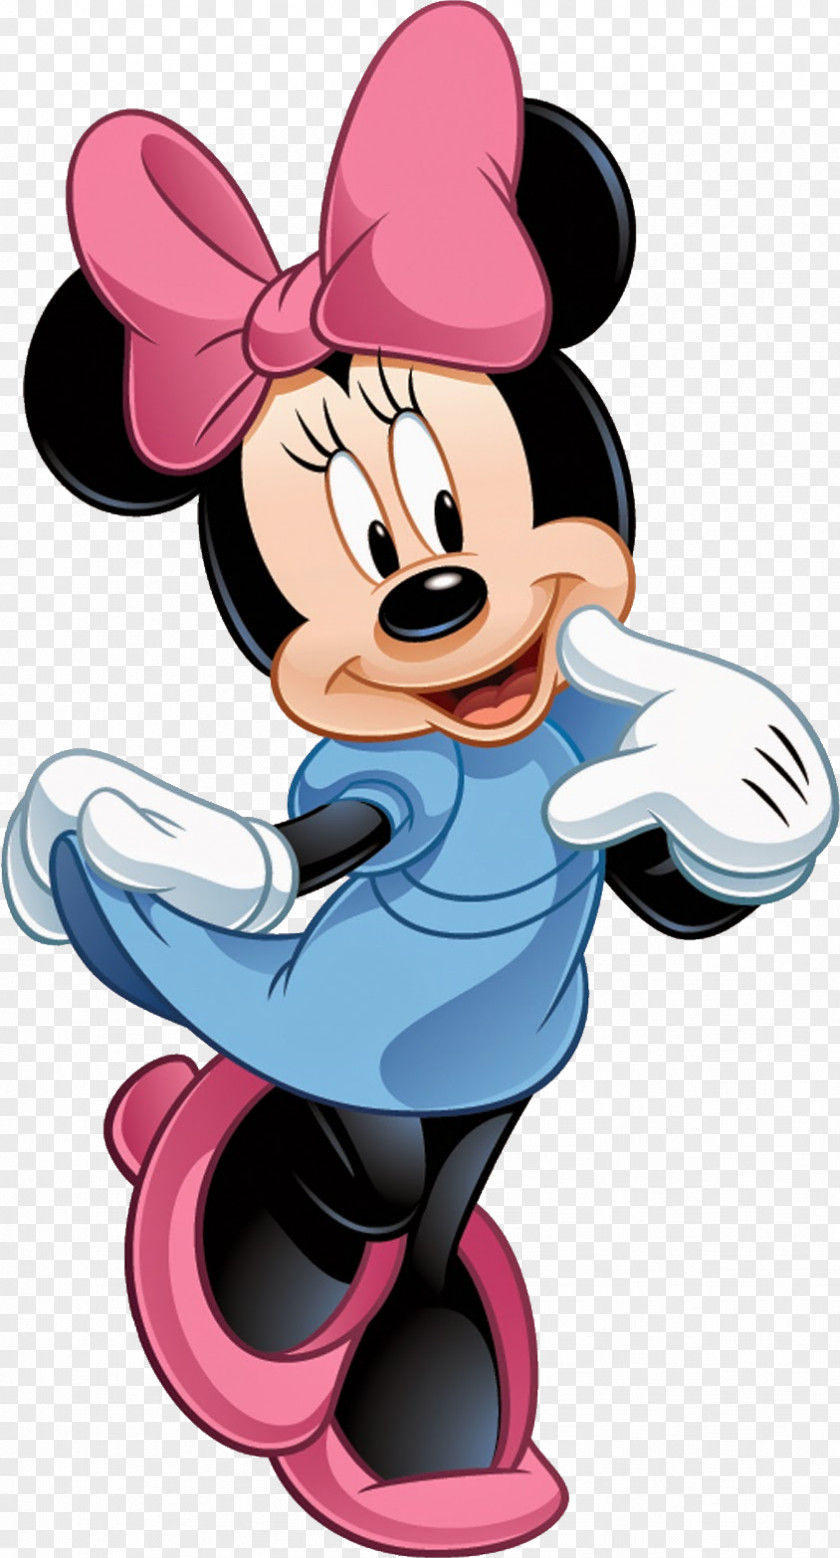 Mickey Mouse Minnie Donald Duck Goofy Pete PNG